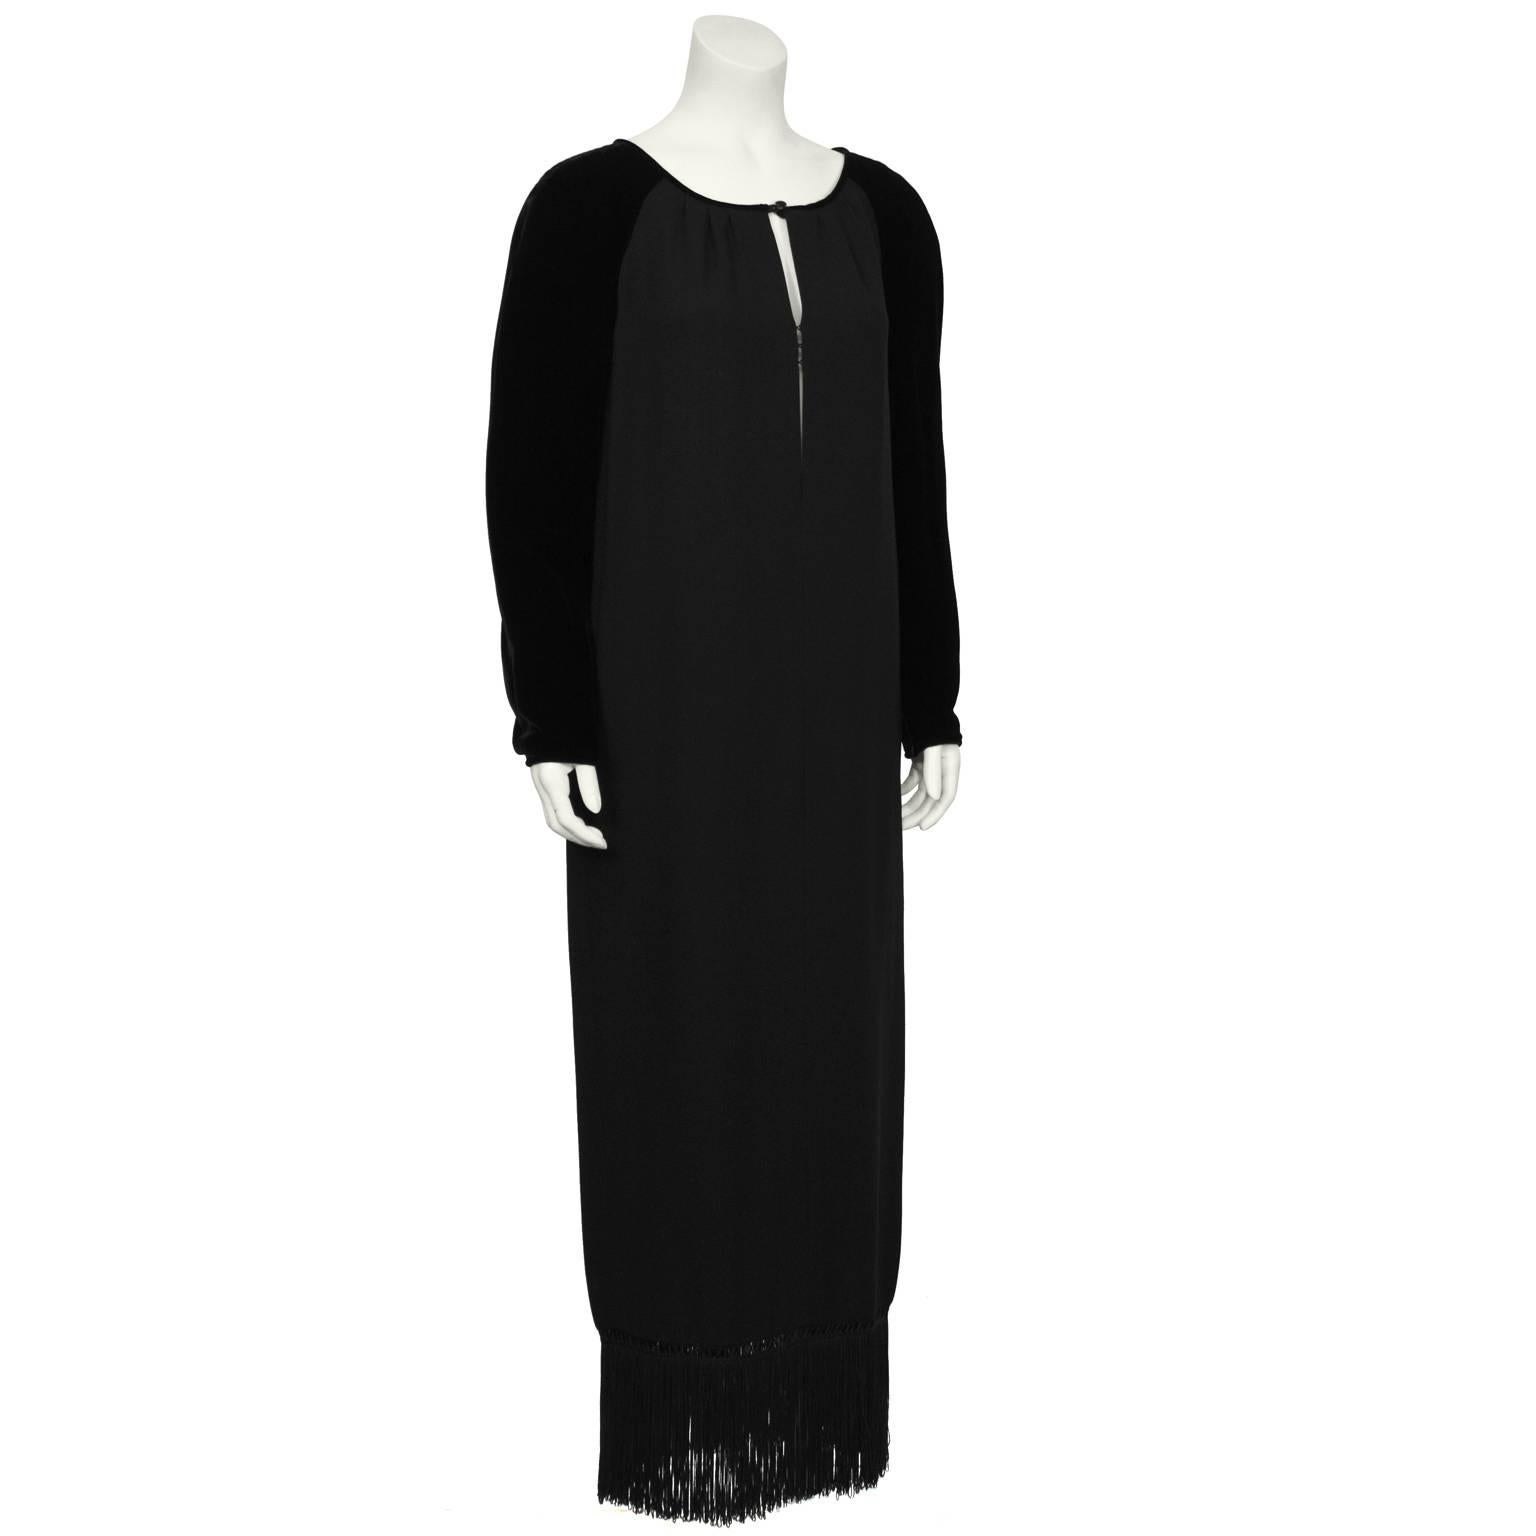 Gorgeous black velvet and crepe Valentino gown from the 1980’s. The gown has a slit neckline that fastens at the center with invisible hooks and a faceted black jet button. The neckline is piped in black velvet that blends into the black velvet